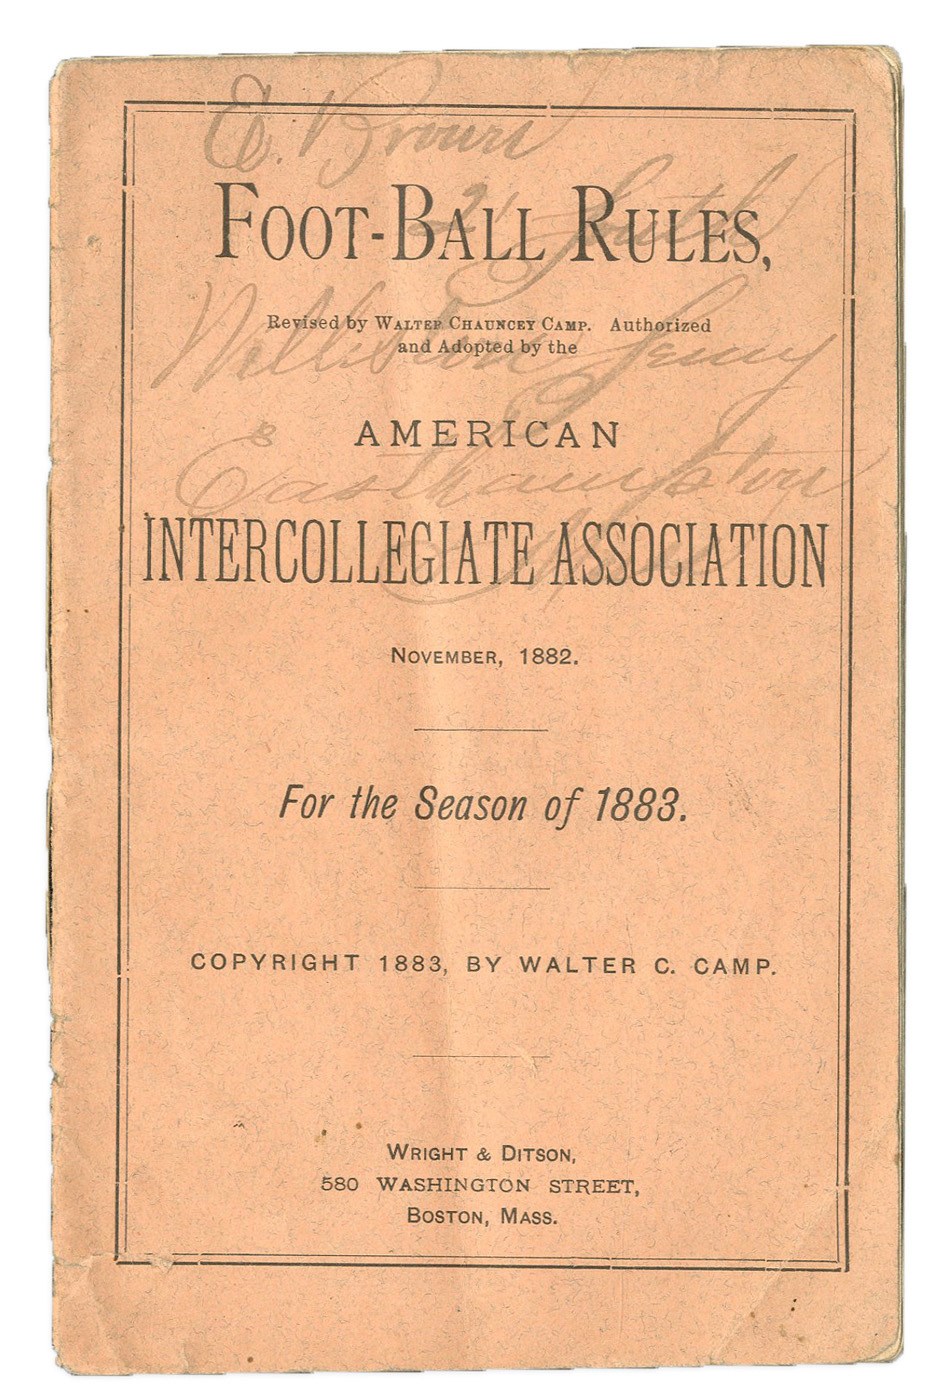 - 1882 Walter Camp's "Rules of Football" Book - Only Known Copy